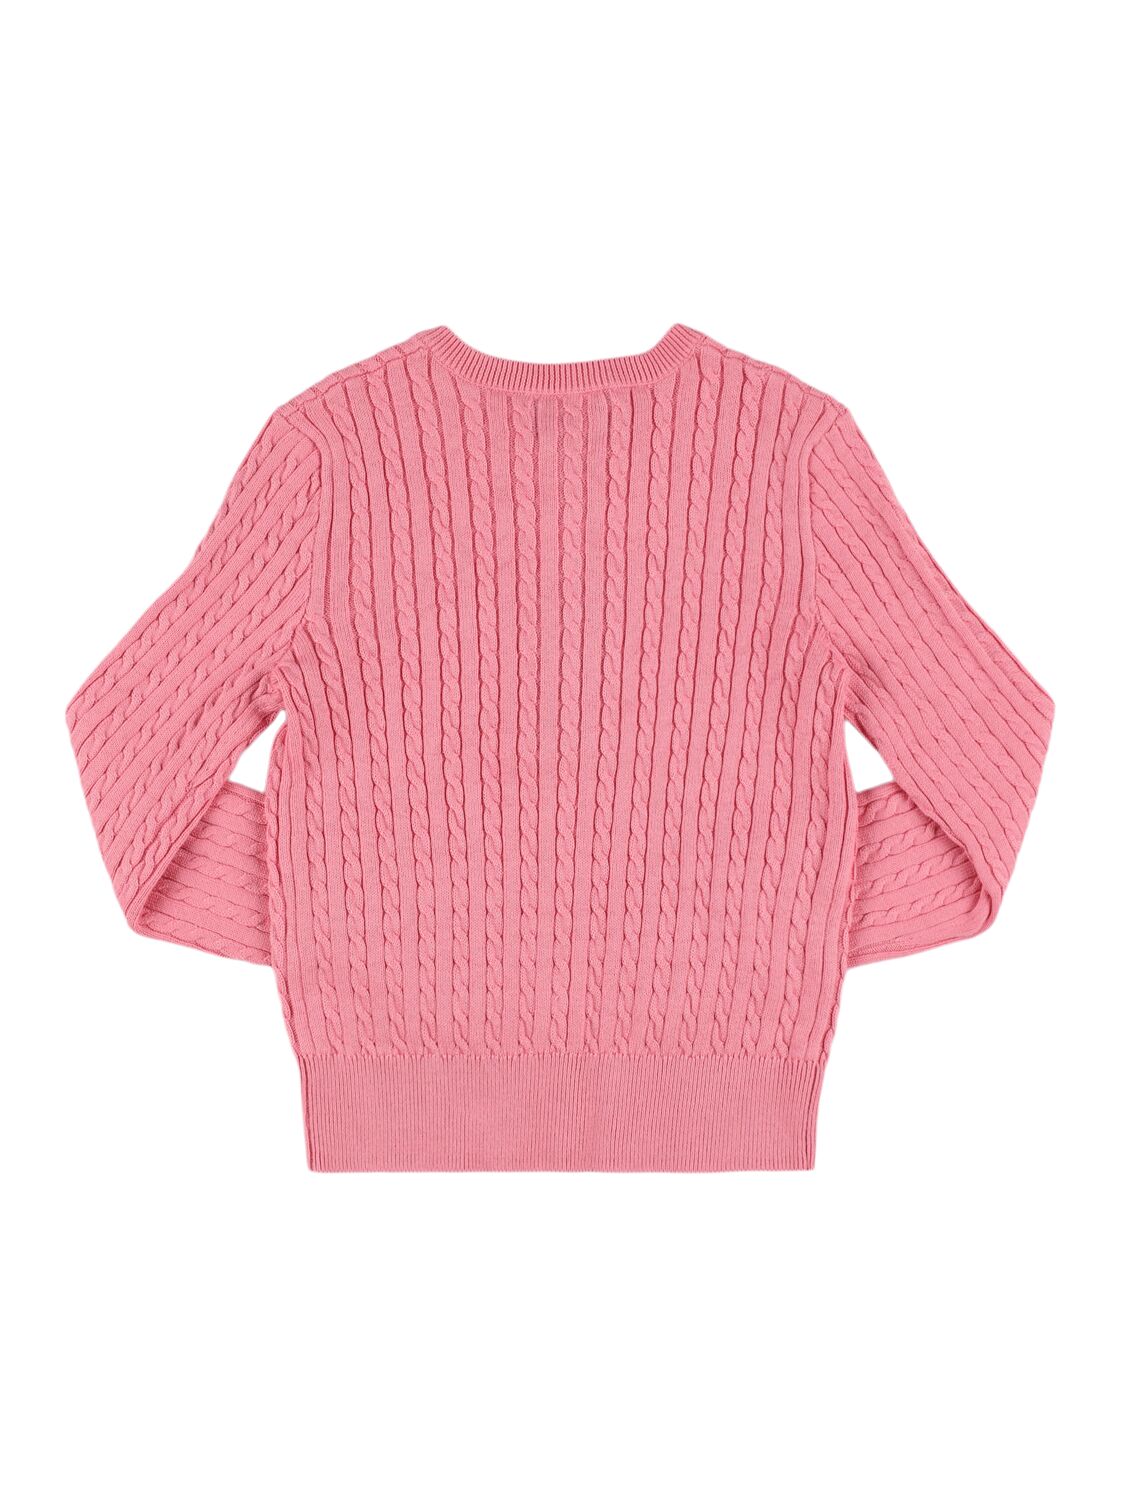 Shop Ralph Lauren Cotton Cable Knit Cardigan W/logo In Pink